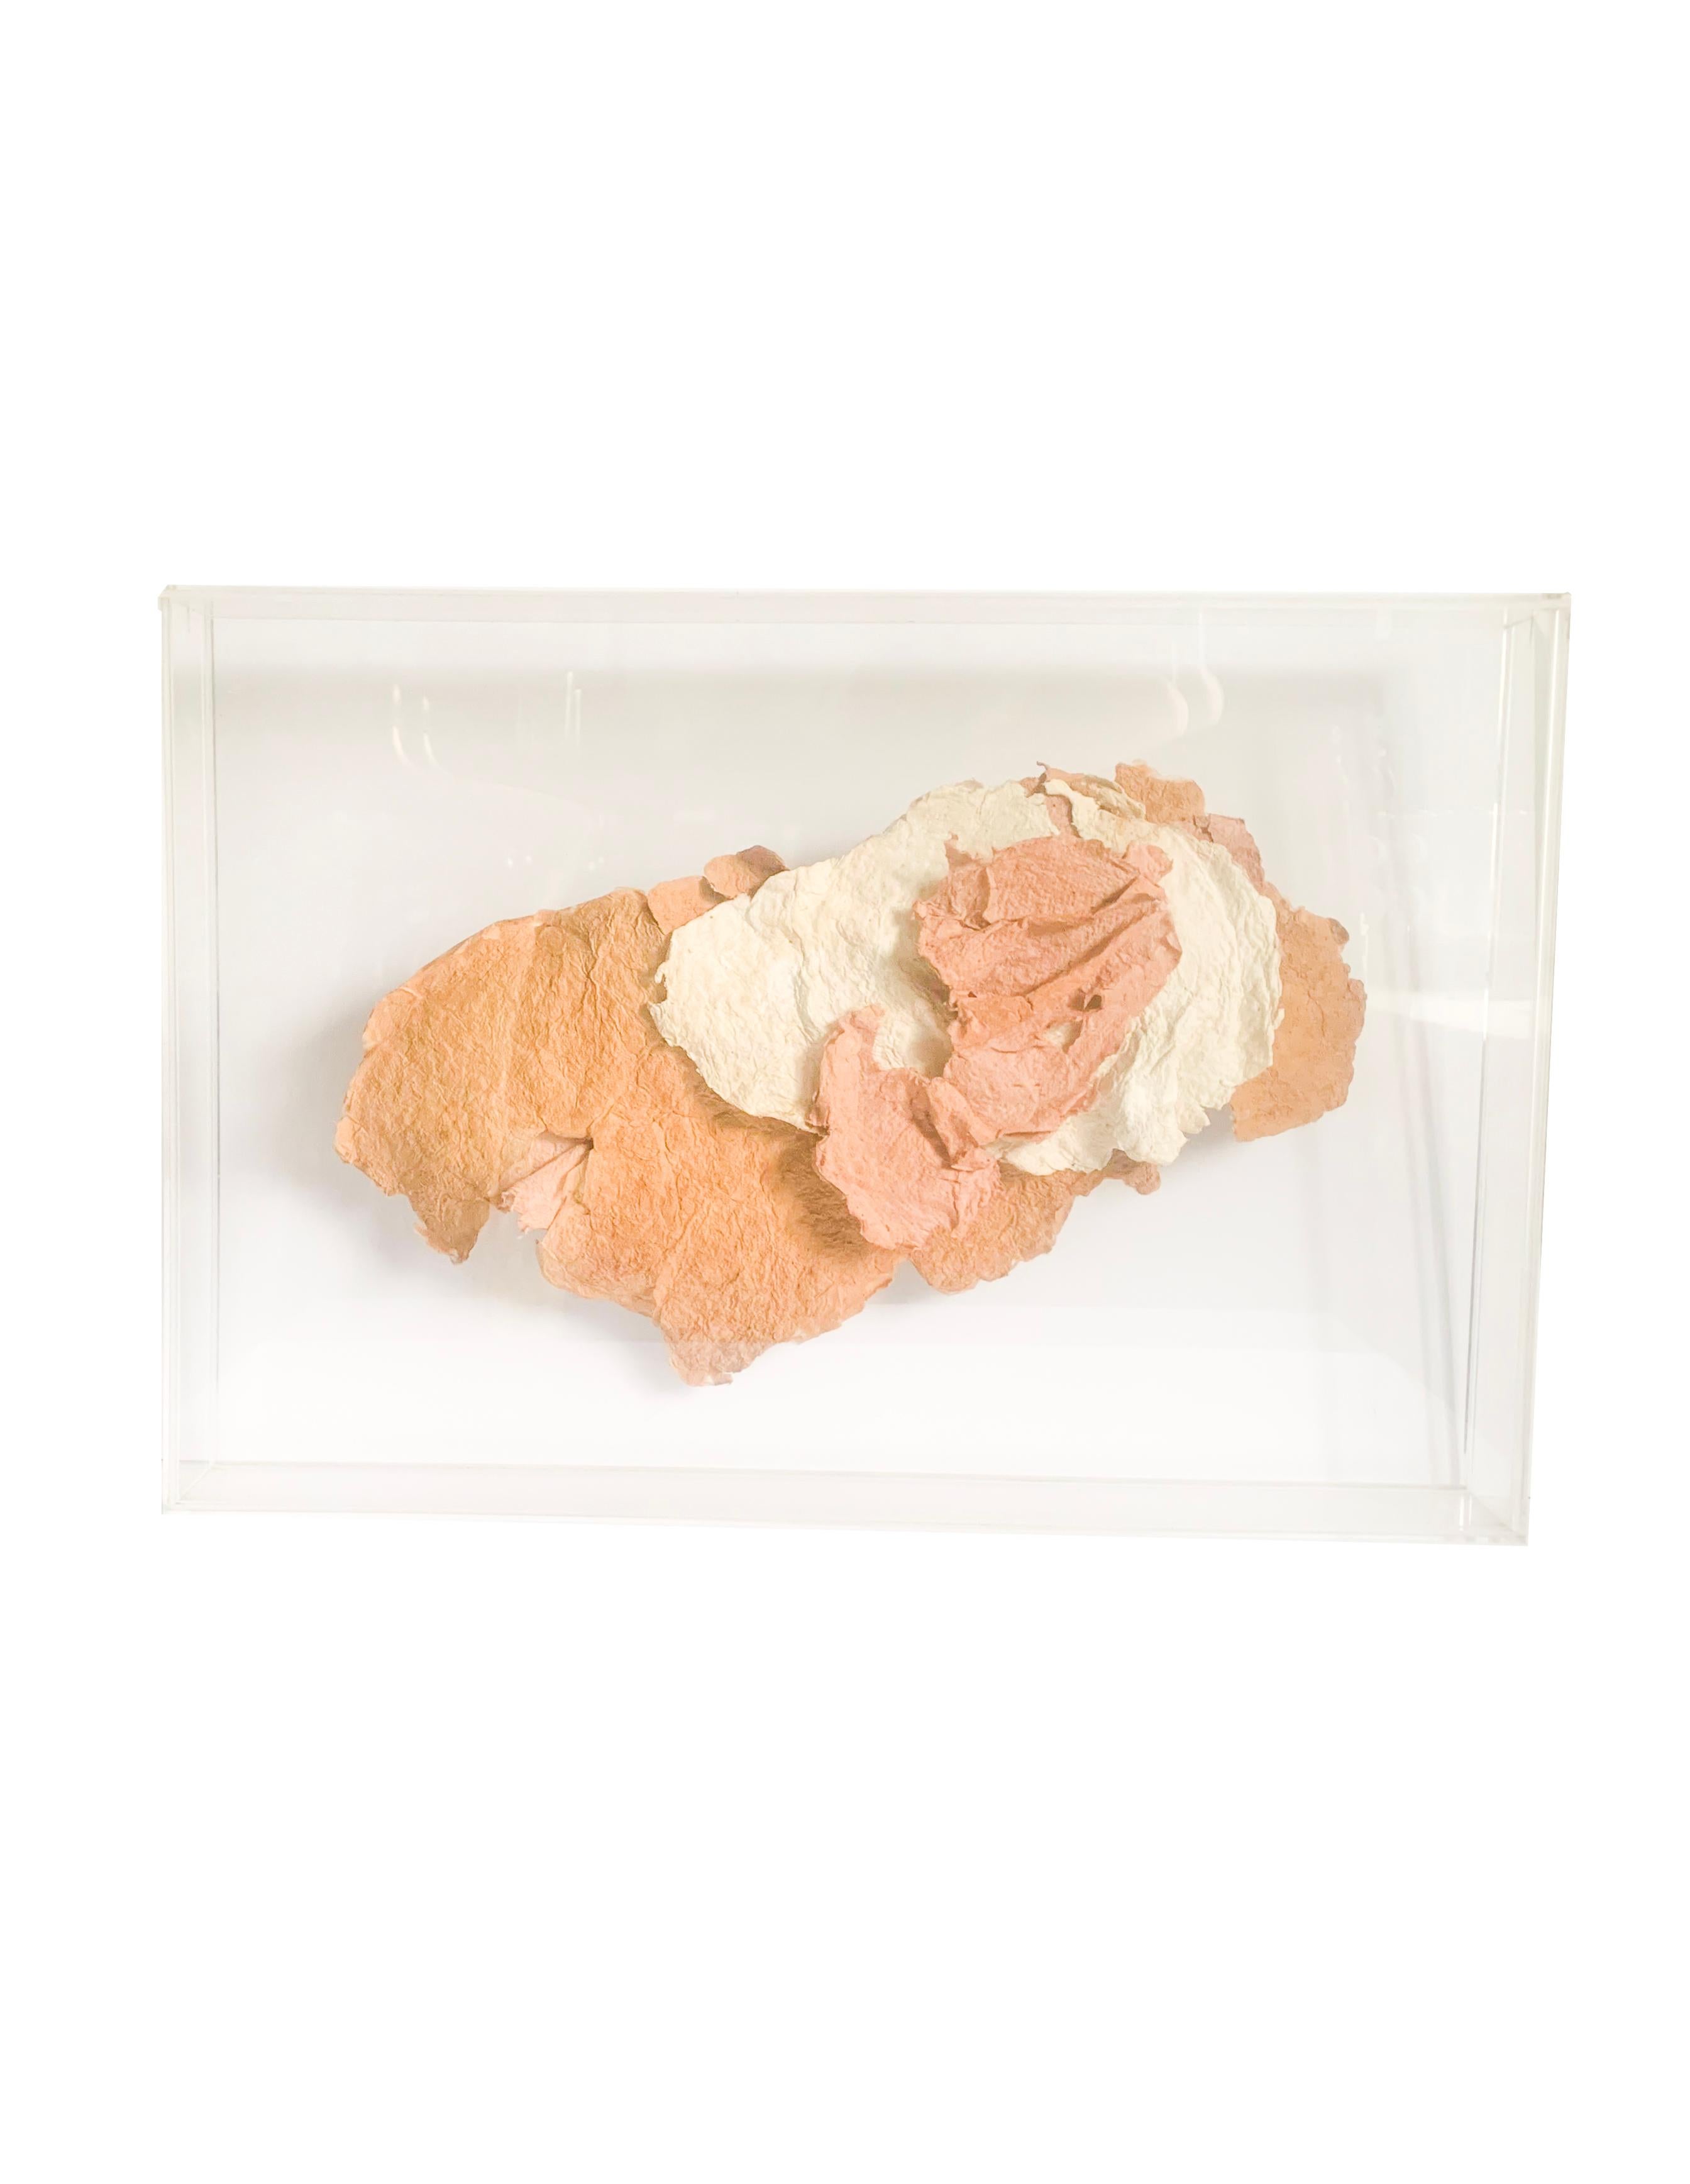 A 1970 - 1980’s handmade paper assemblage by regionally (Northeast USA) known artist Gertrude Simon. This colored handmade paper sculpture by the artist sits within an acrylic floating frame.

About the artist:

Gertrude Simon has been mentioned